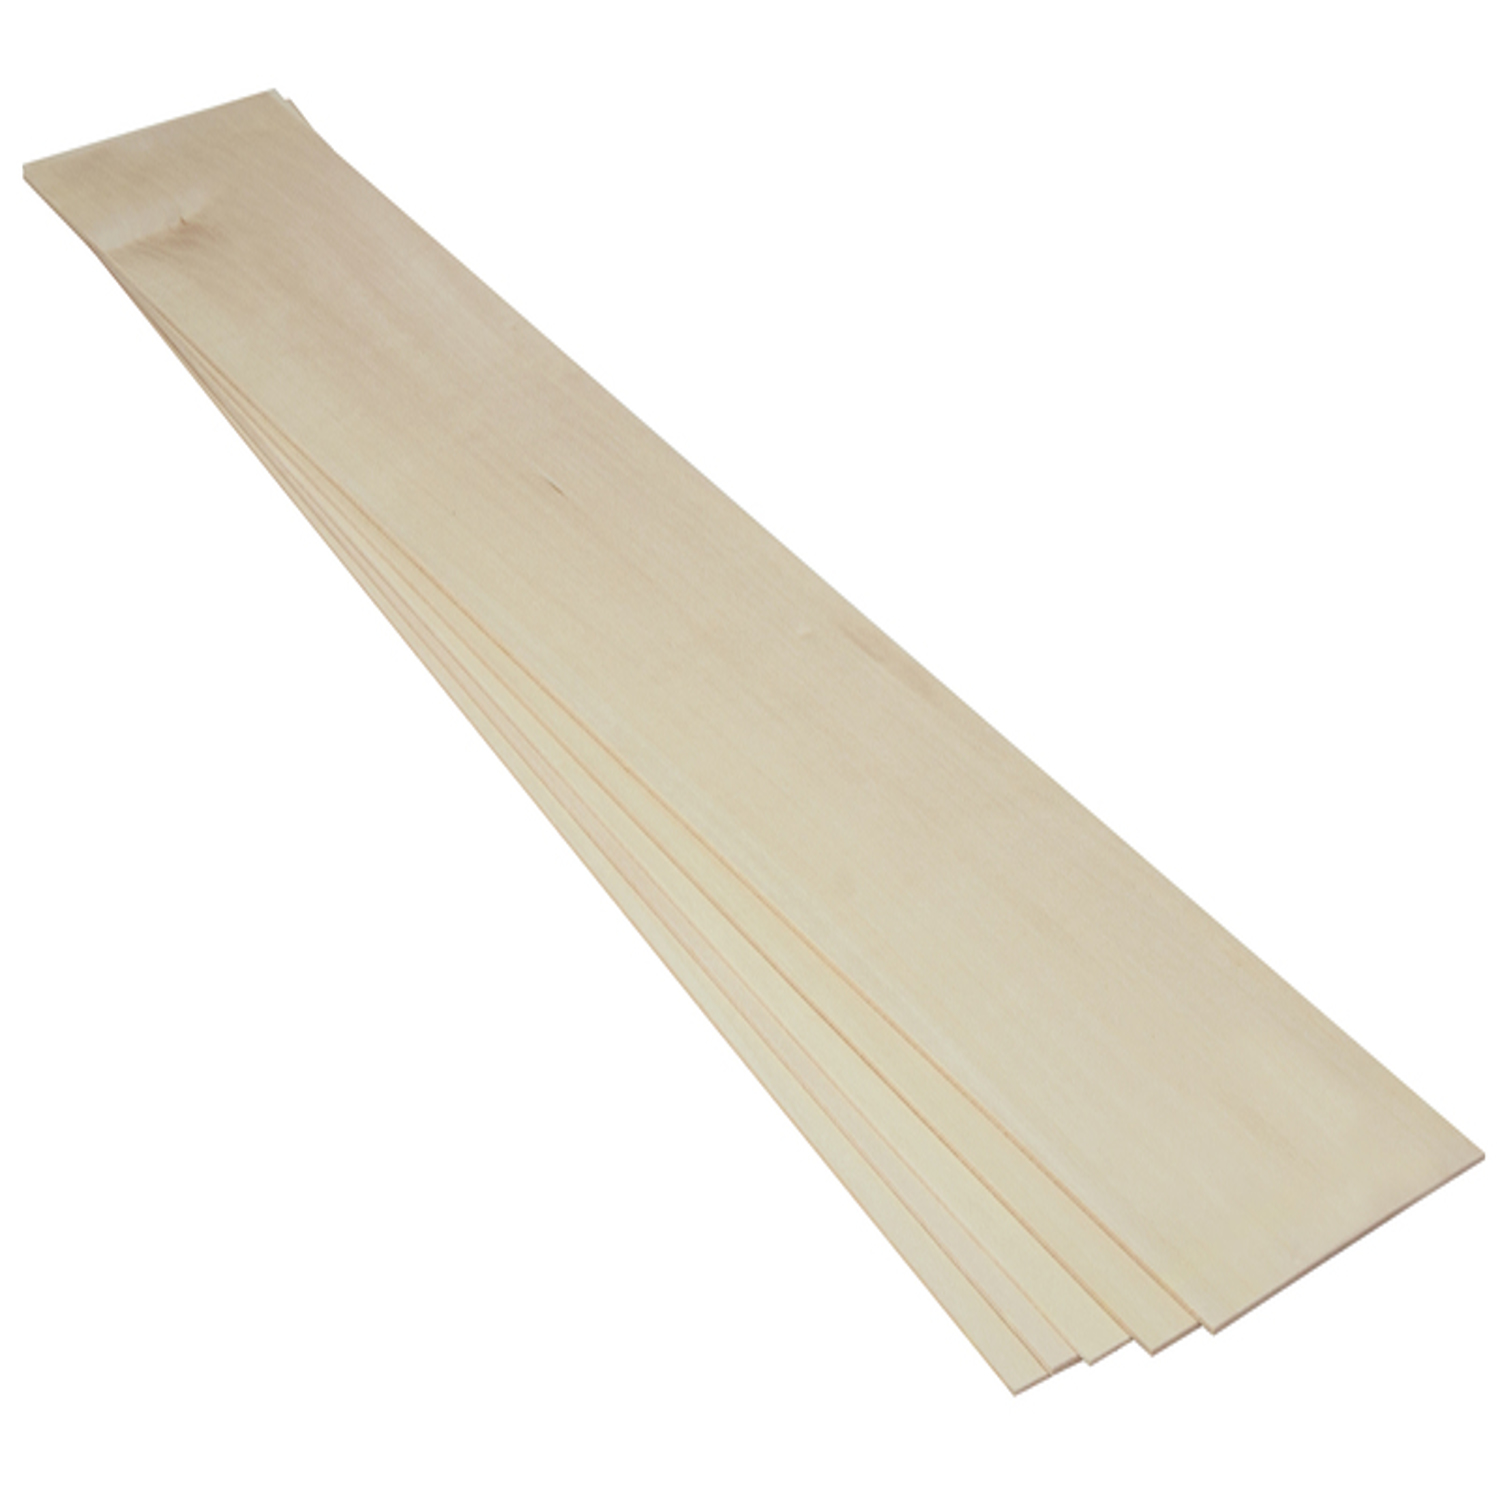 Midwest Products Balsa Wood Sheets - 6 Pieces, 1 x 1 x 36